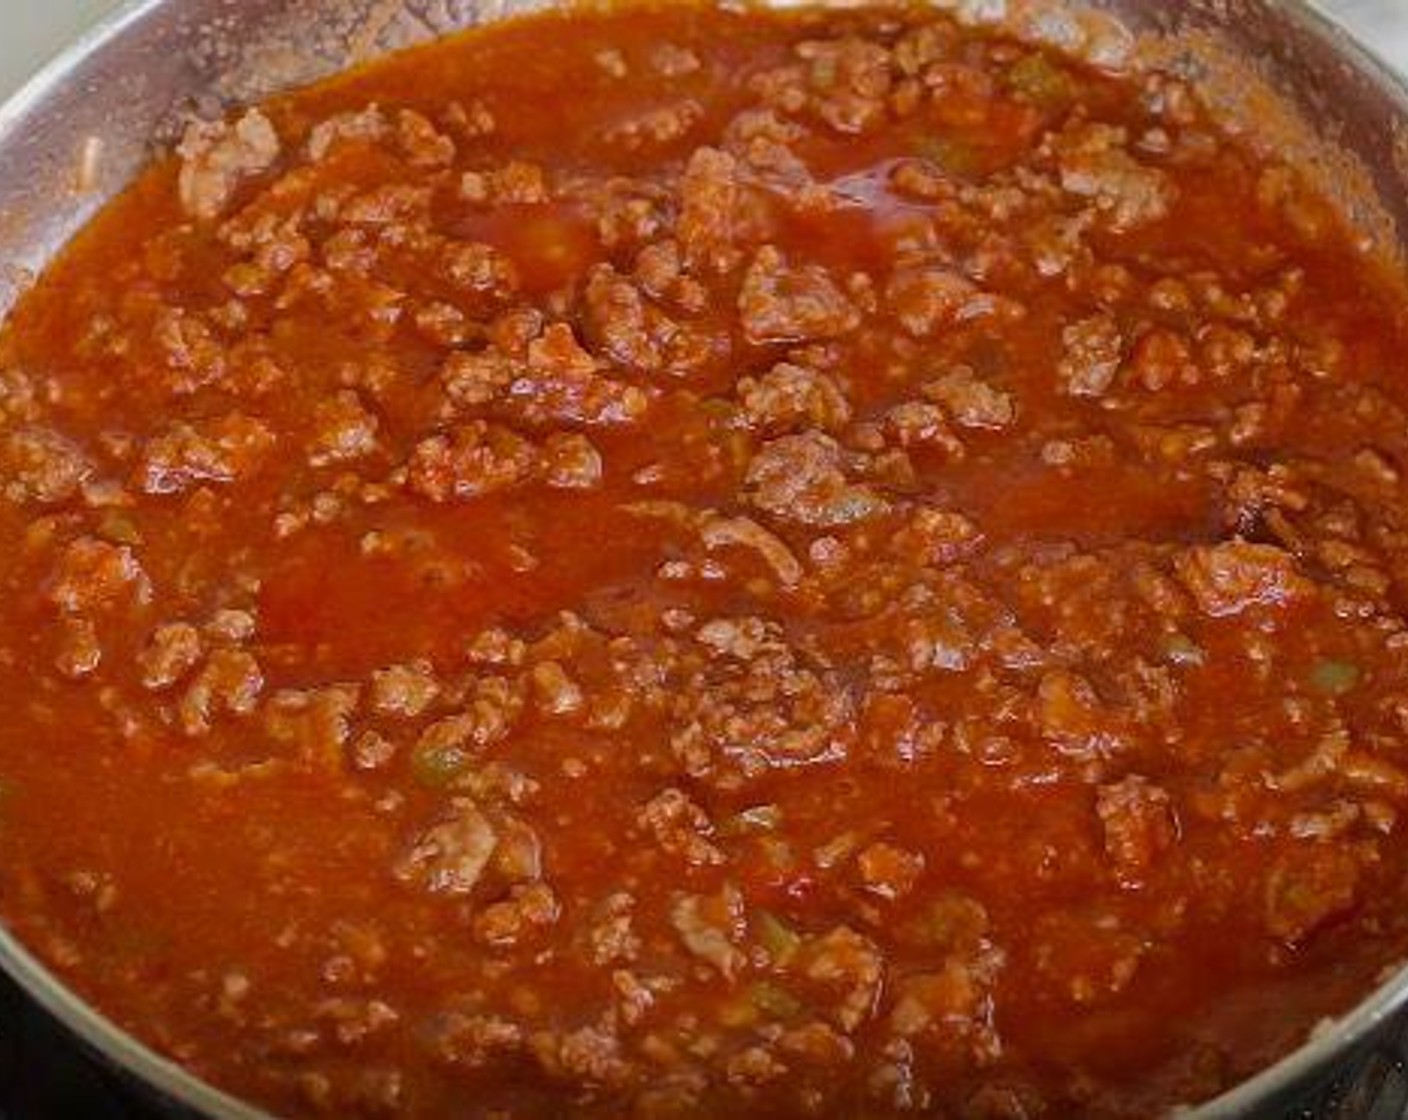 step 3 Add Tomato Sauce (1 cup), Tomato Paste (2 Tbsp), Brown Sugar (1 Tbsp), and Water (1/2 cup). Stir to combine. Lower the heat to low, cover the meat sauce and cook for 15 to 20 minutes. Served with hot buns and enjoy!